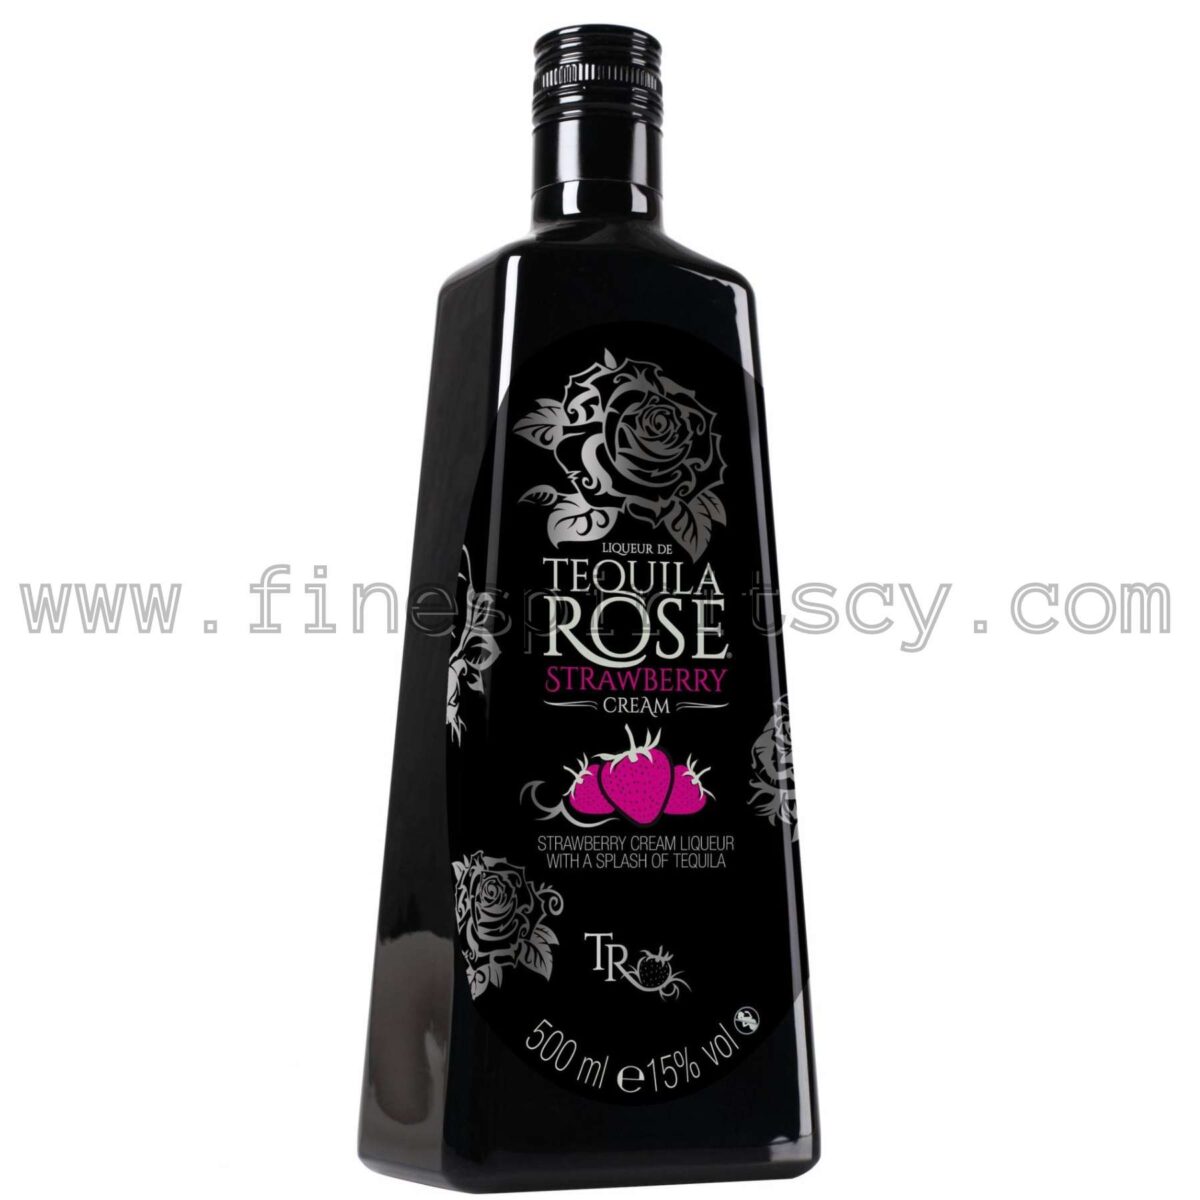 Tequila Rose Strawberry Cream Liqueur Cyprus Price Order Online 500ml 50cl 0.5L